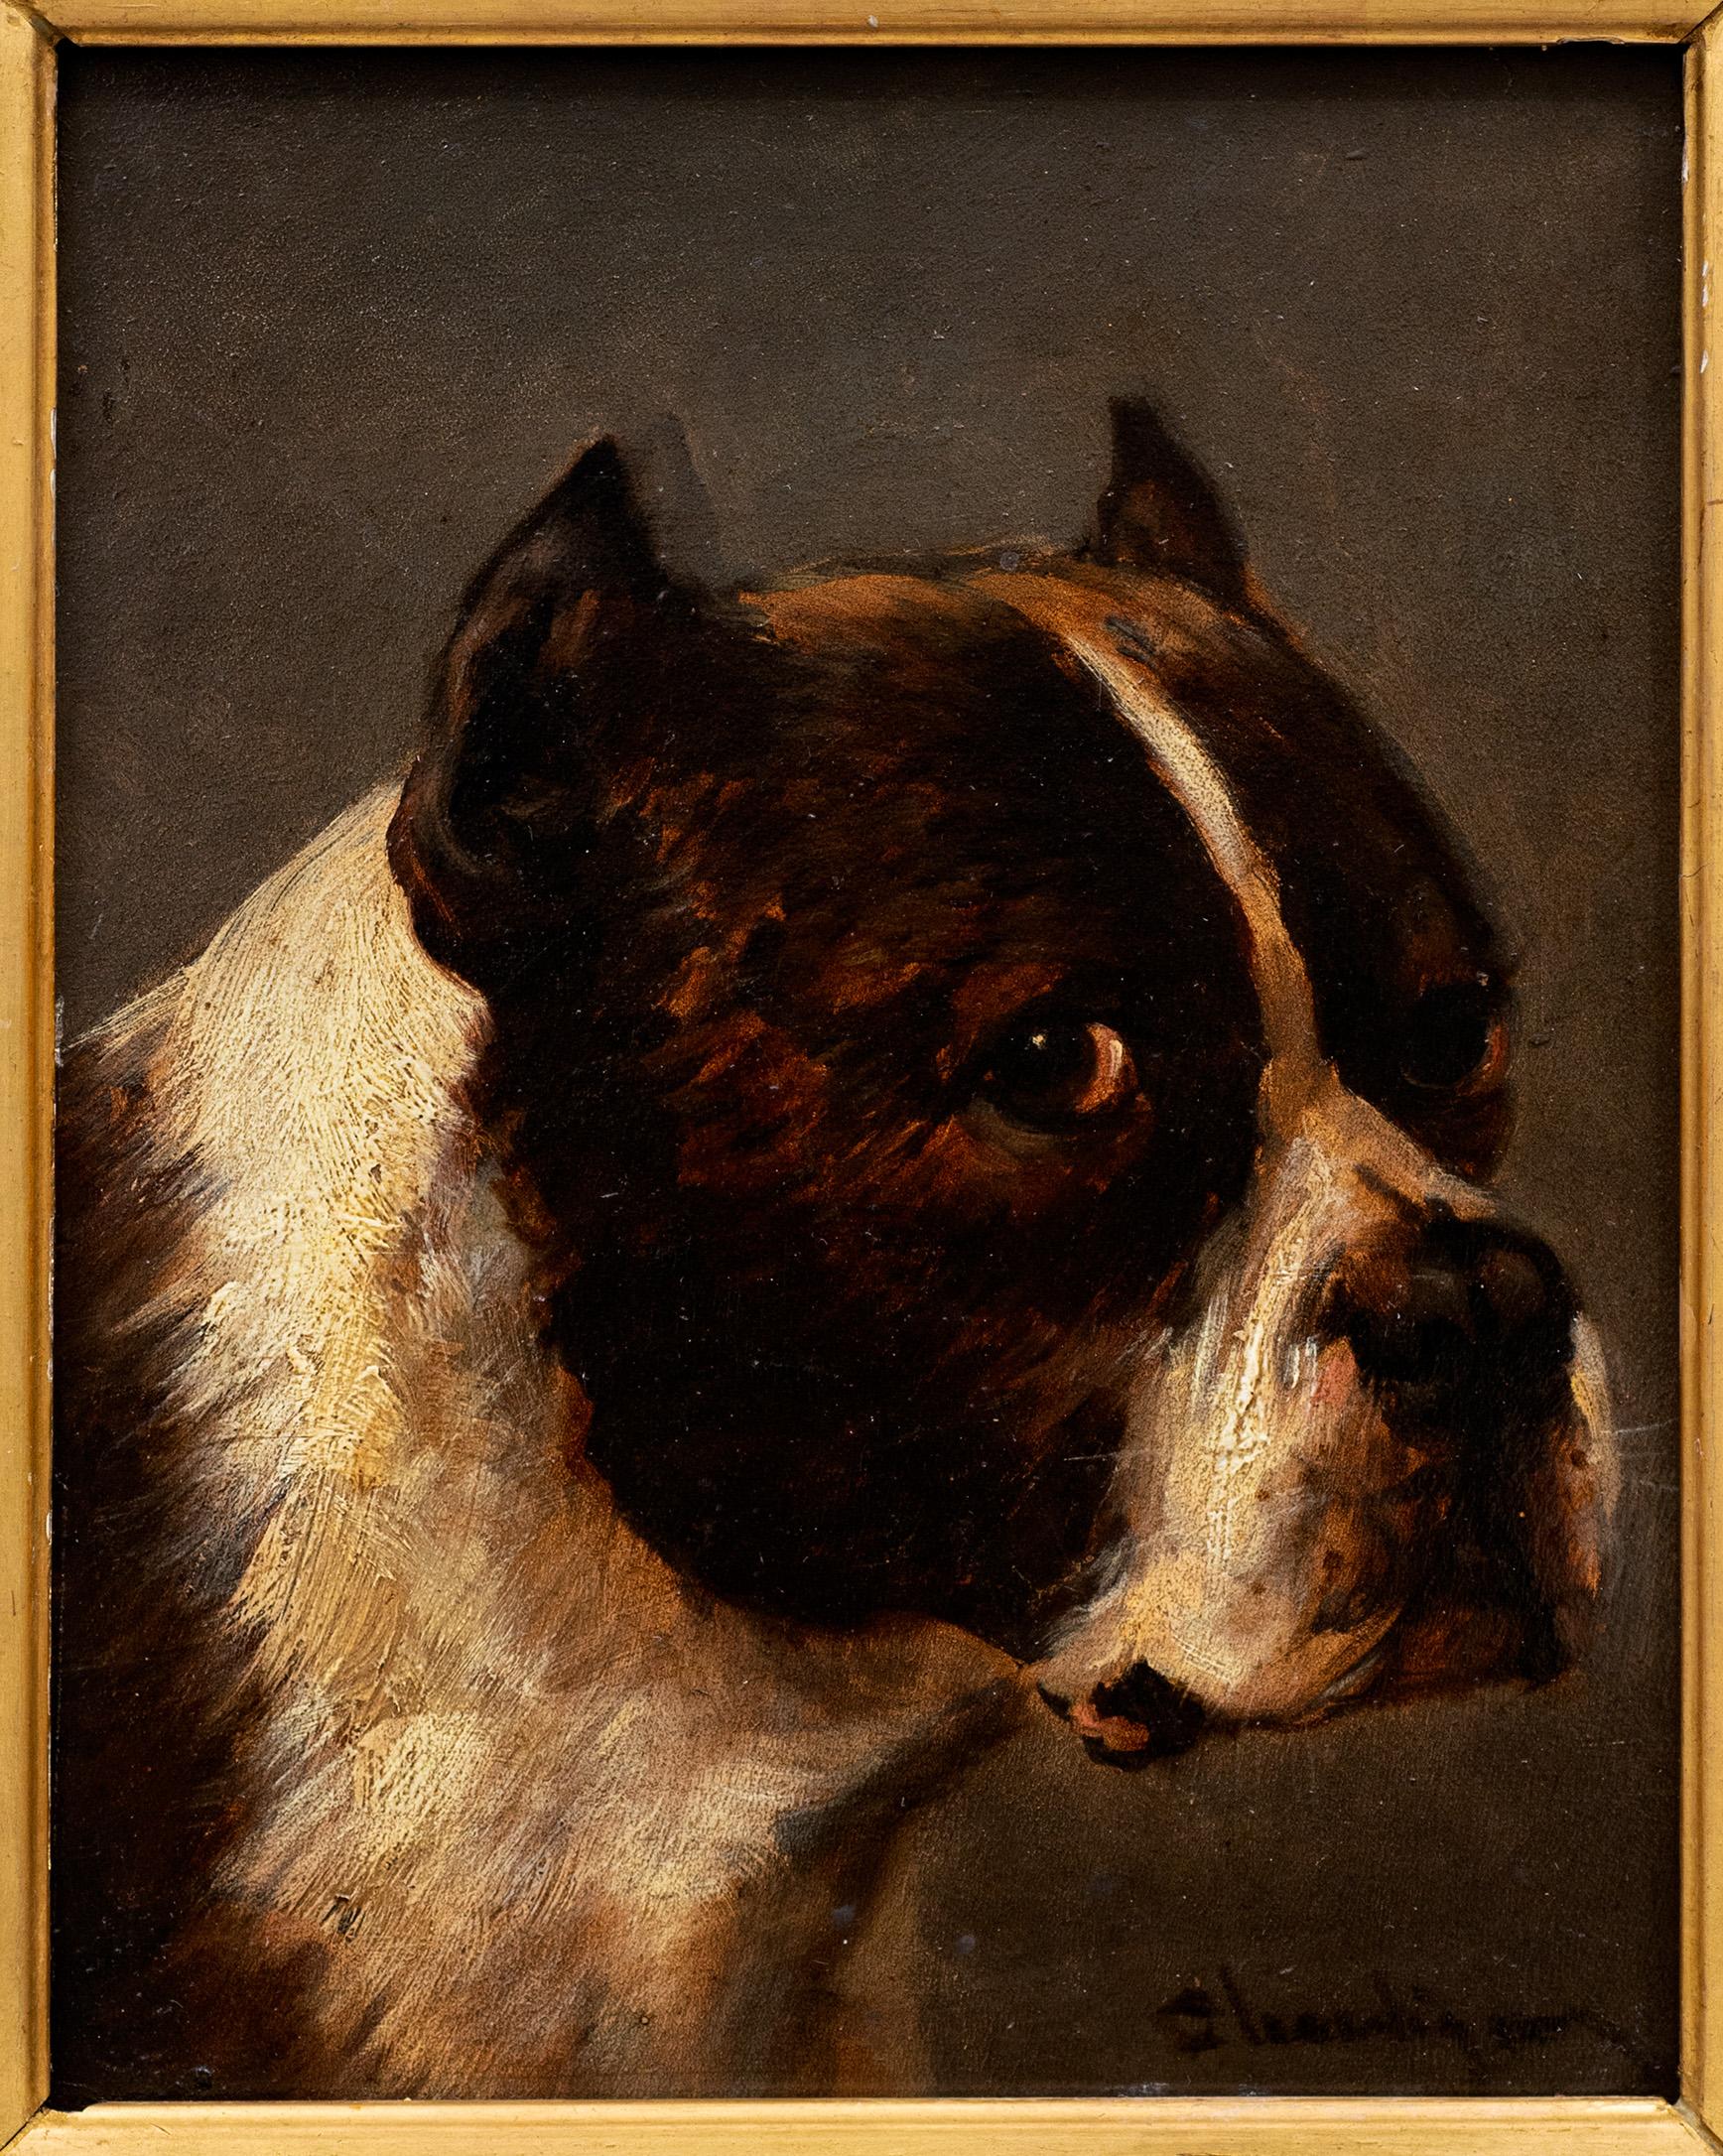 Antique Painting of a Hunting Dog
Jules Chardigny (1849-1892)
Circa 1870
Oil on wood panel 
Housed within its beautiful and original ornate original gilt frame.
9 x 7 1/4 (15 1/4 x 13 3/4 frame) inches

About the Cane Corso breed: 
